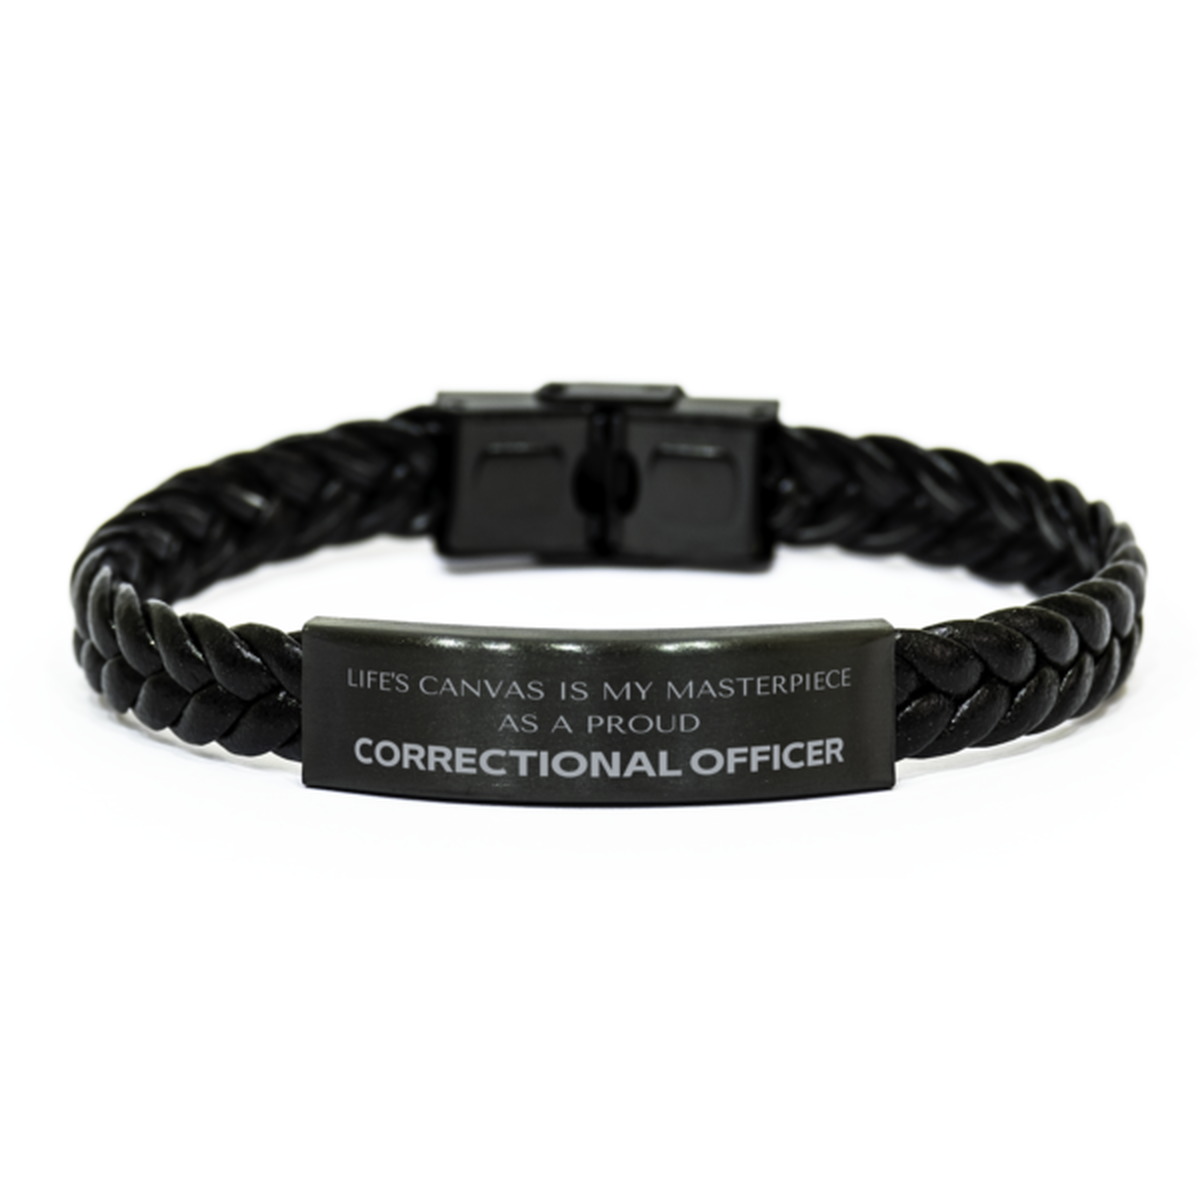 Proud Correctional Officer Gifts, Life's canvas is my masterpiece, Epic Birthday Christmas Unique Braided Leather Bracelet For Correctional Officer, Coworkers, Men, Women, Friends